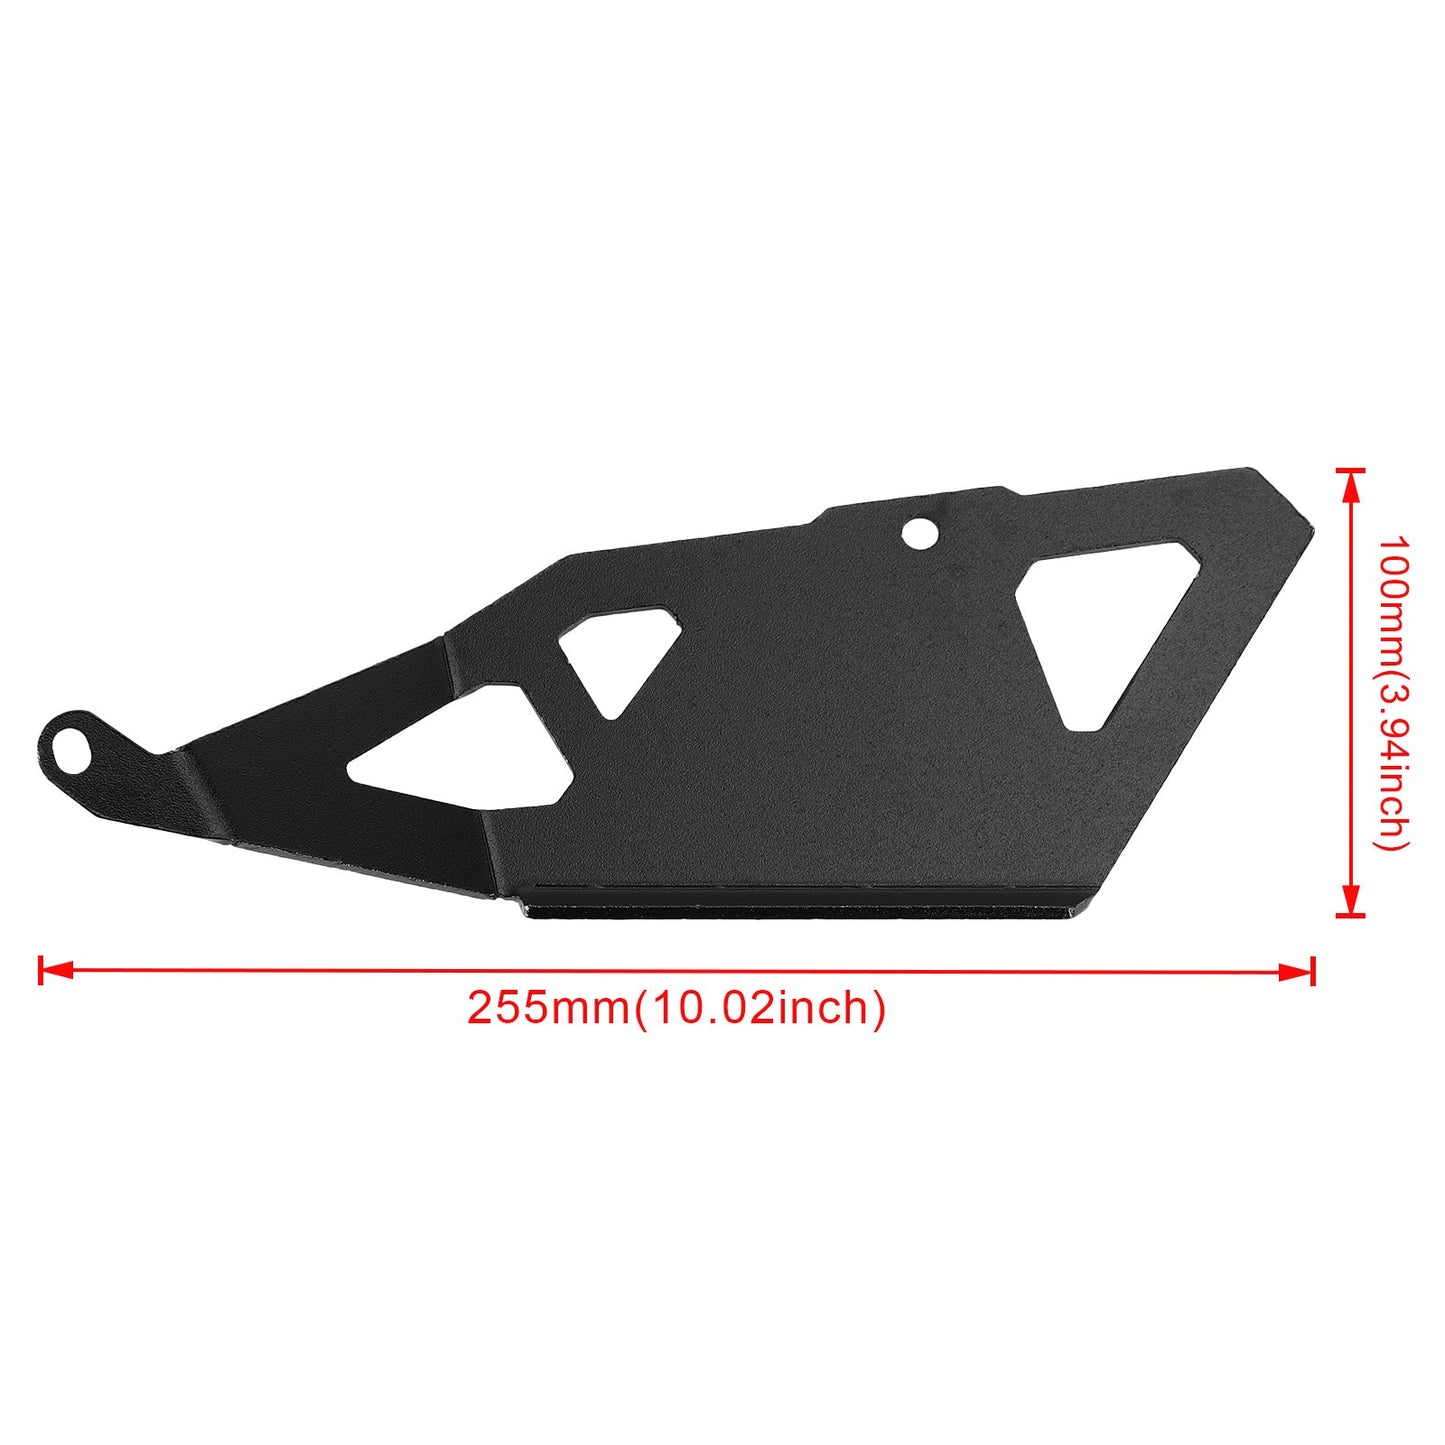 Exhaust Guard Protector Flap Control Cover For BMW 1250GS R1200GS Adventure LC